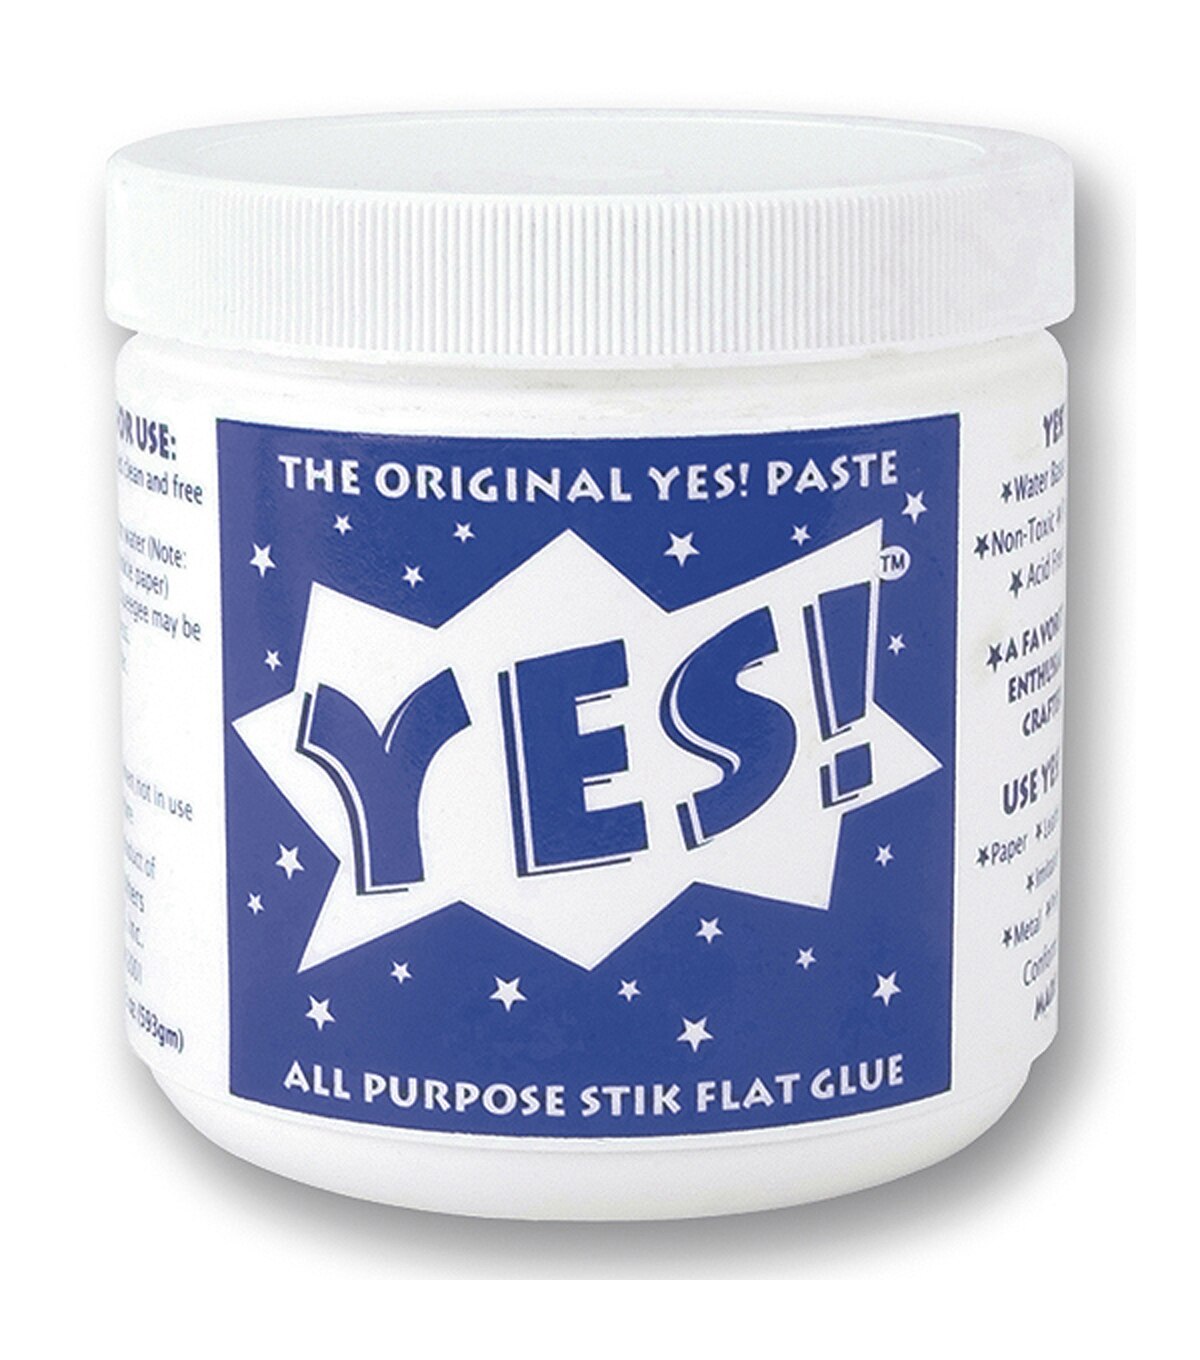 Paste here. Паста Yes. Glued paper. Puff paste. Pasting text Glue.